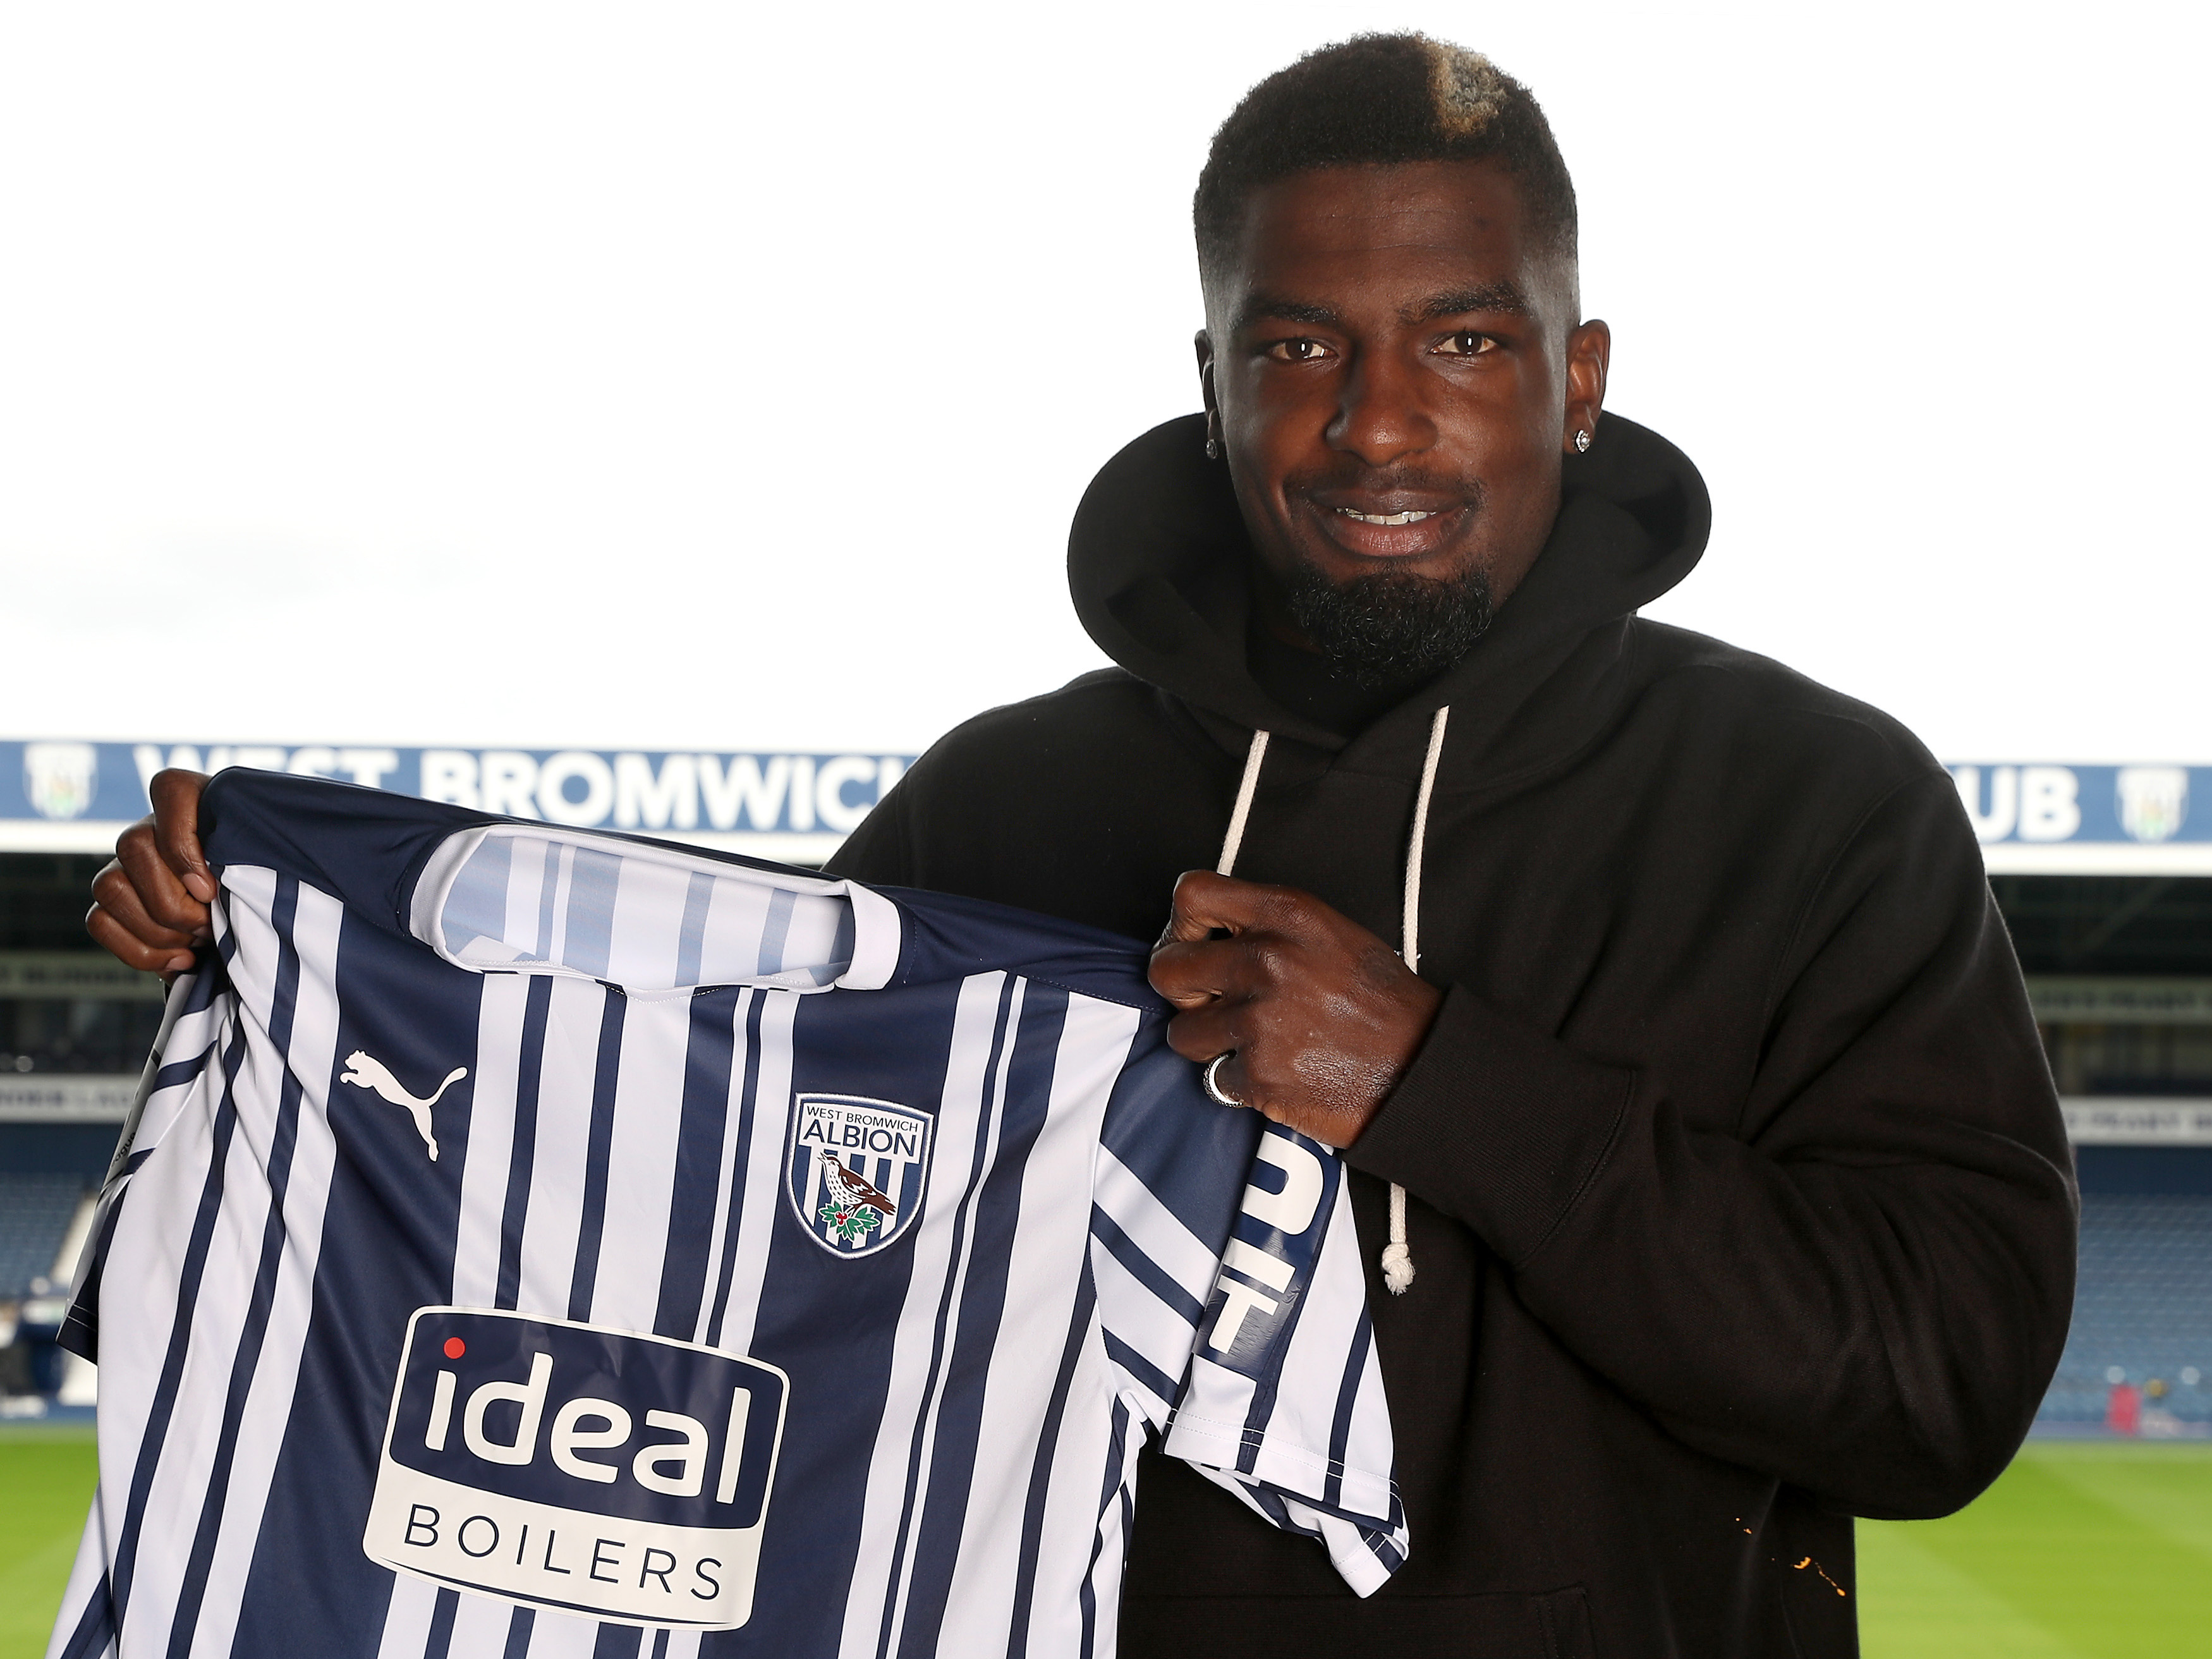 Albion have signed defender Cédric Kipré from Wigan Athletic on a four-year deal